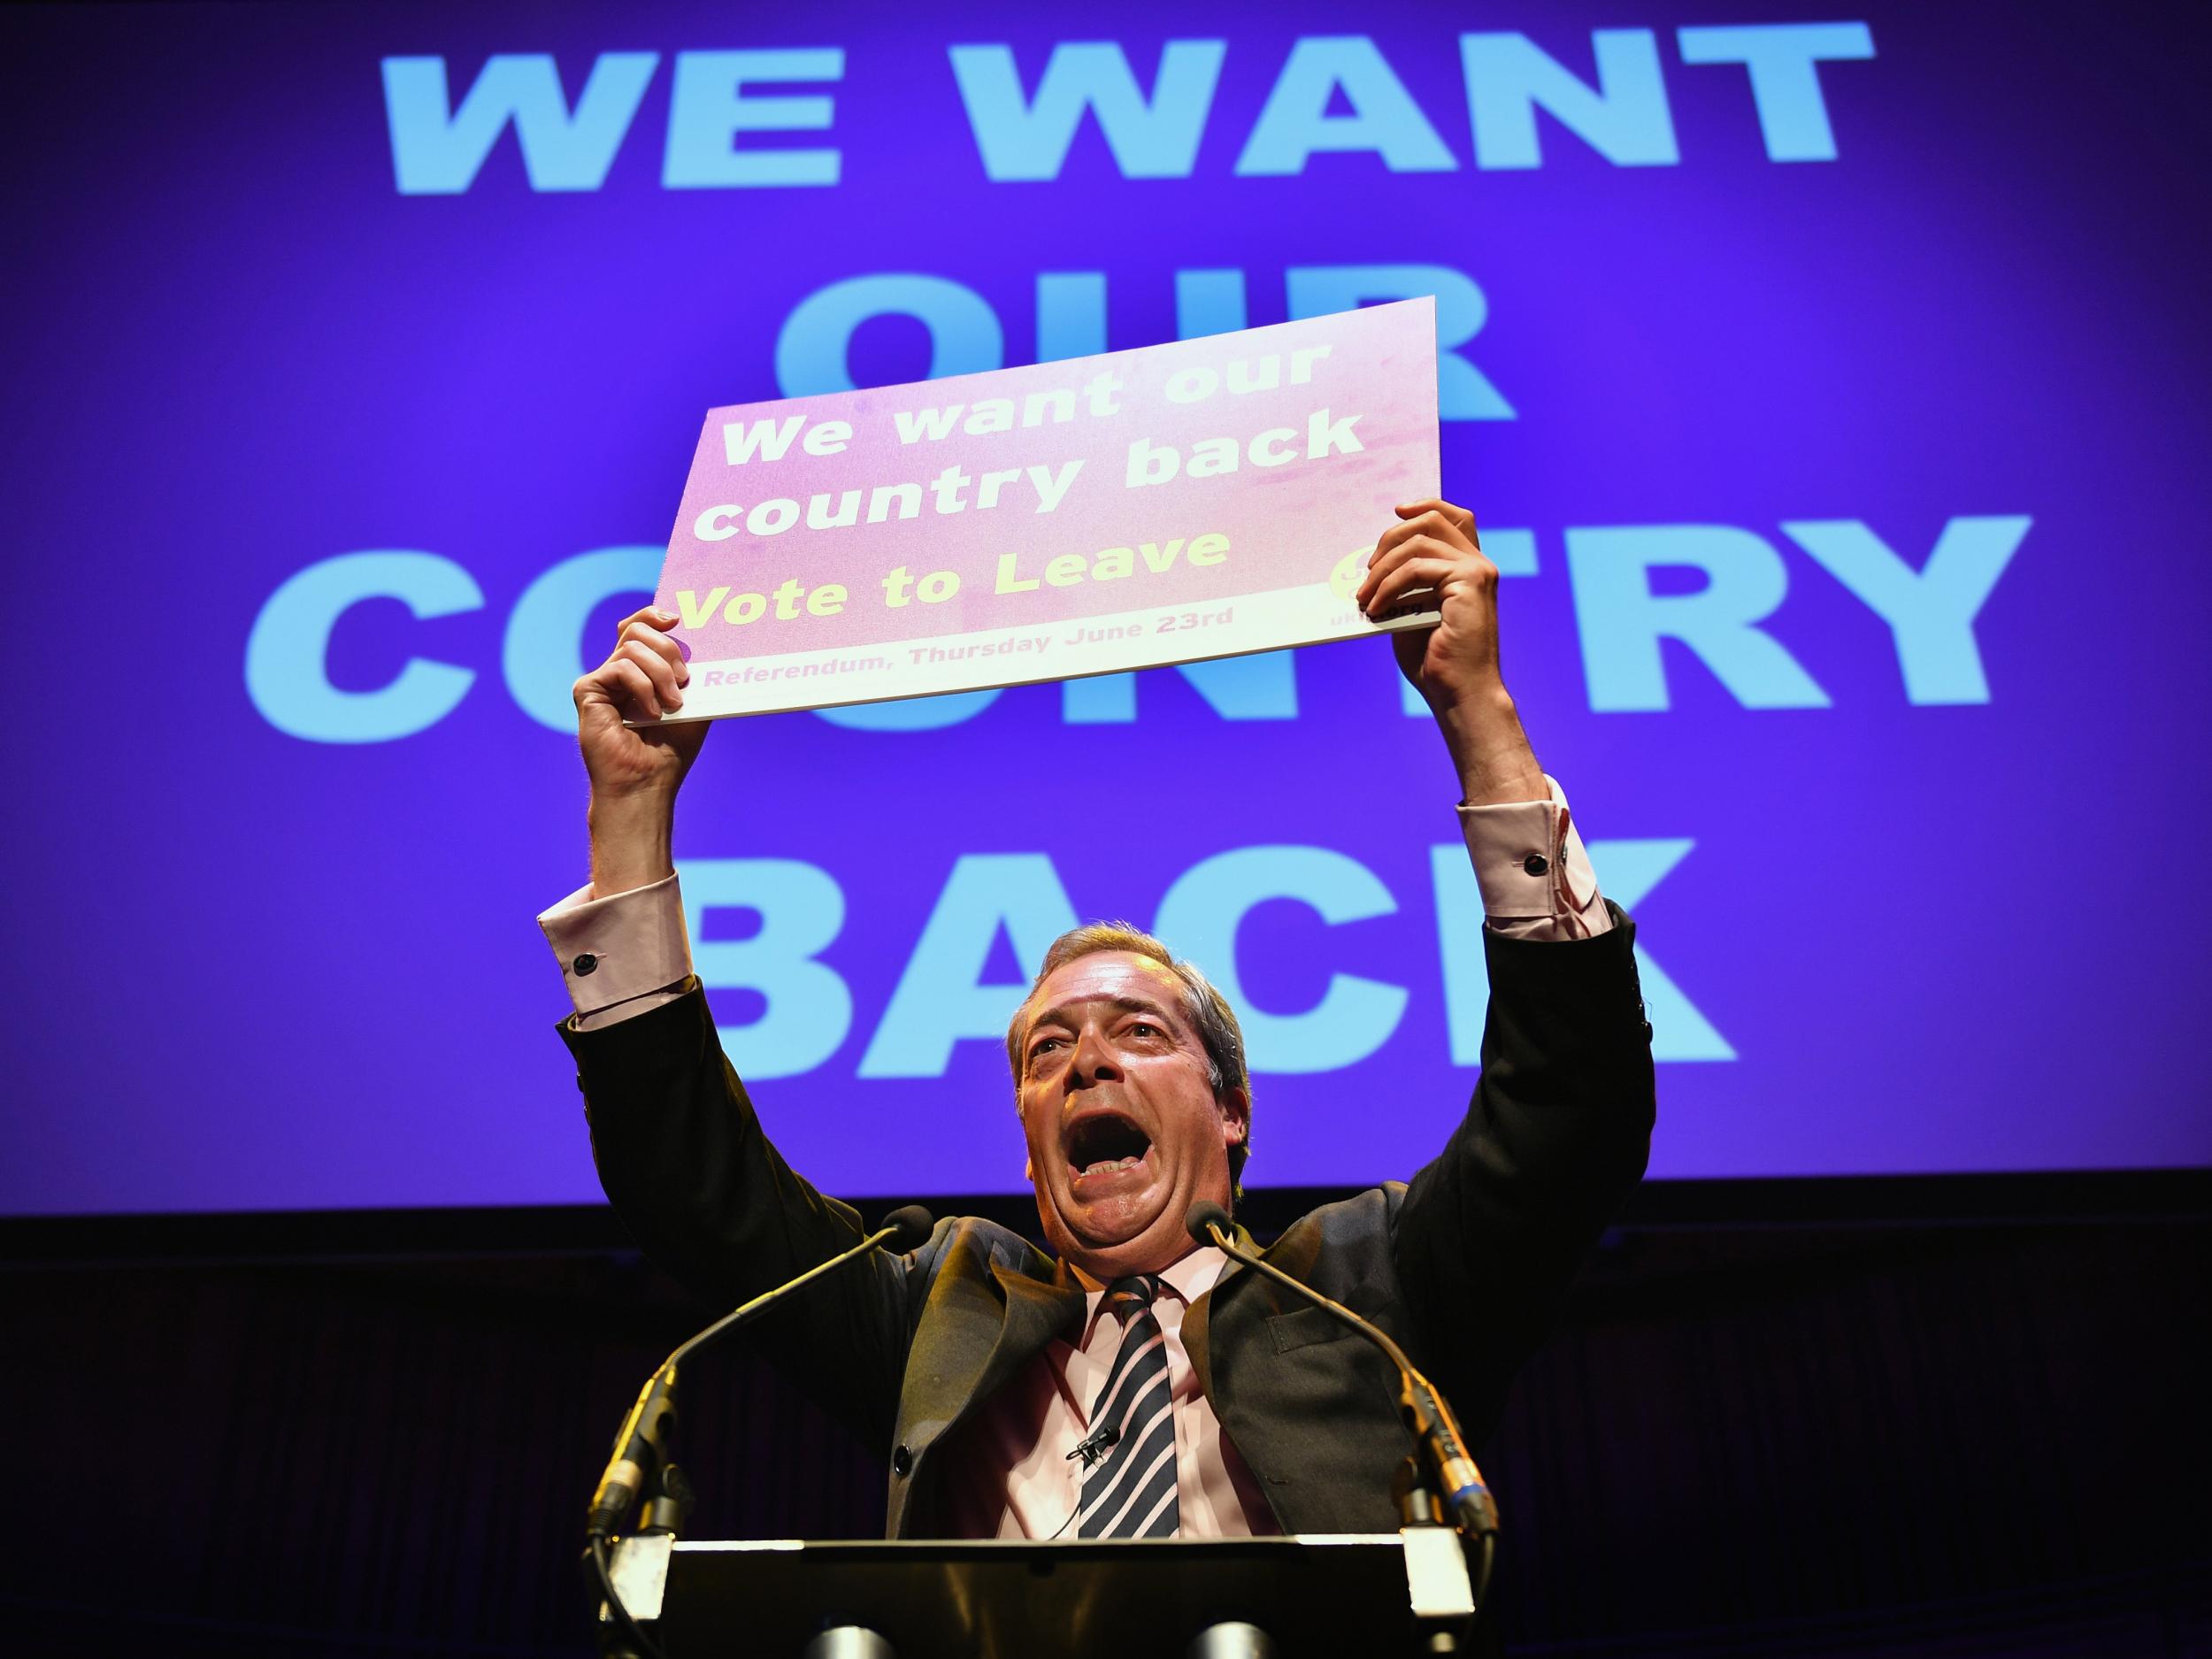 UKIP Leader Nigel Farage MEP speaks at the final 'We Want Our Country Back' public meeting of the EU Referendum campaign on June 20, 2016